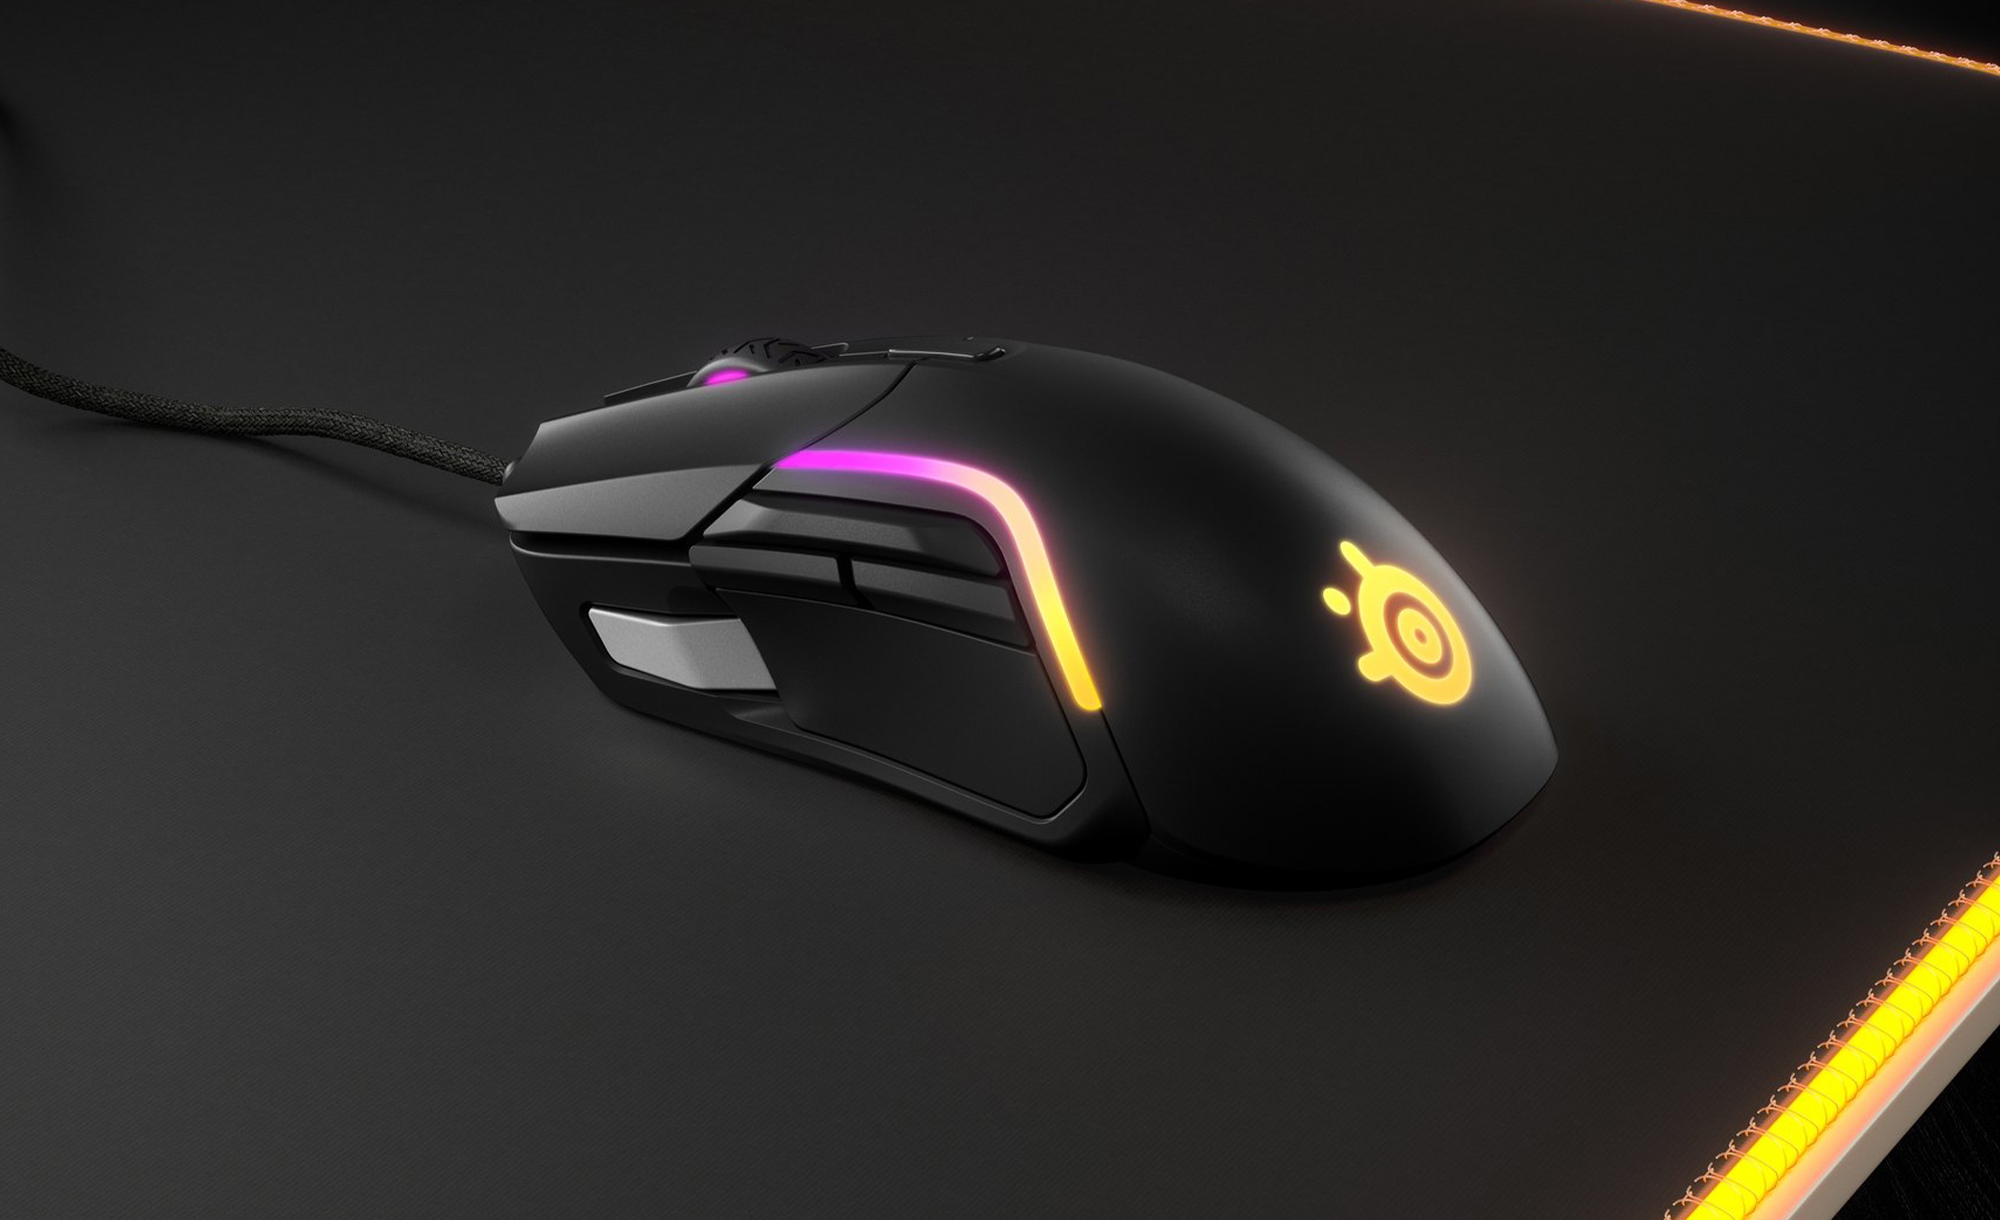 The black SteelSeries Rival 5 gaming mouse on a black mousepad.